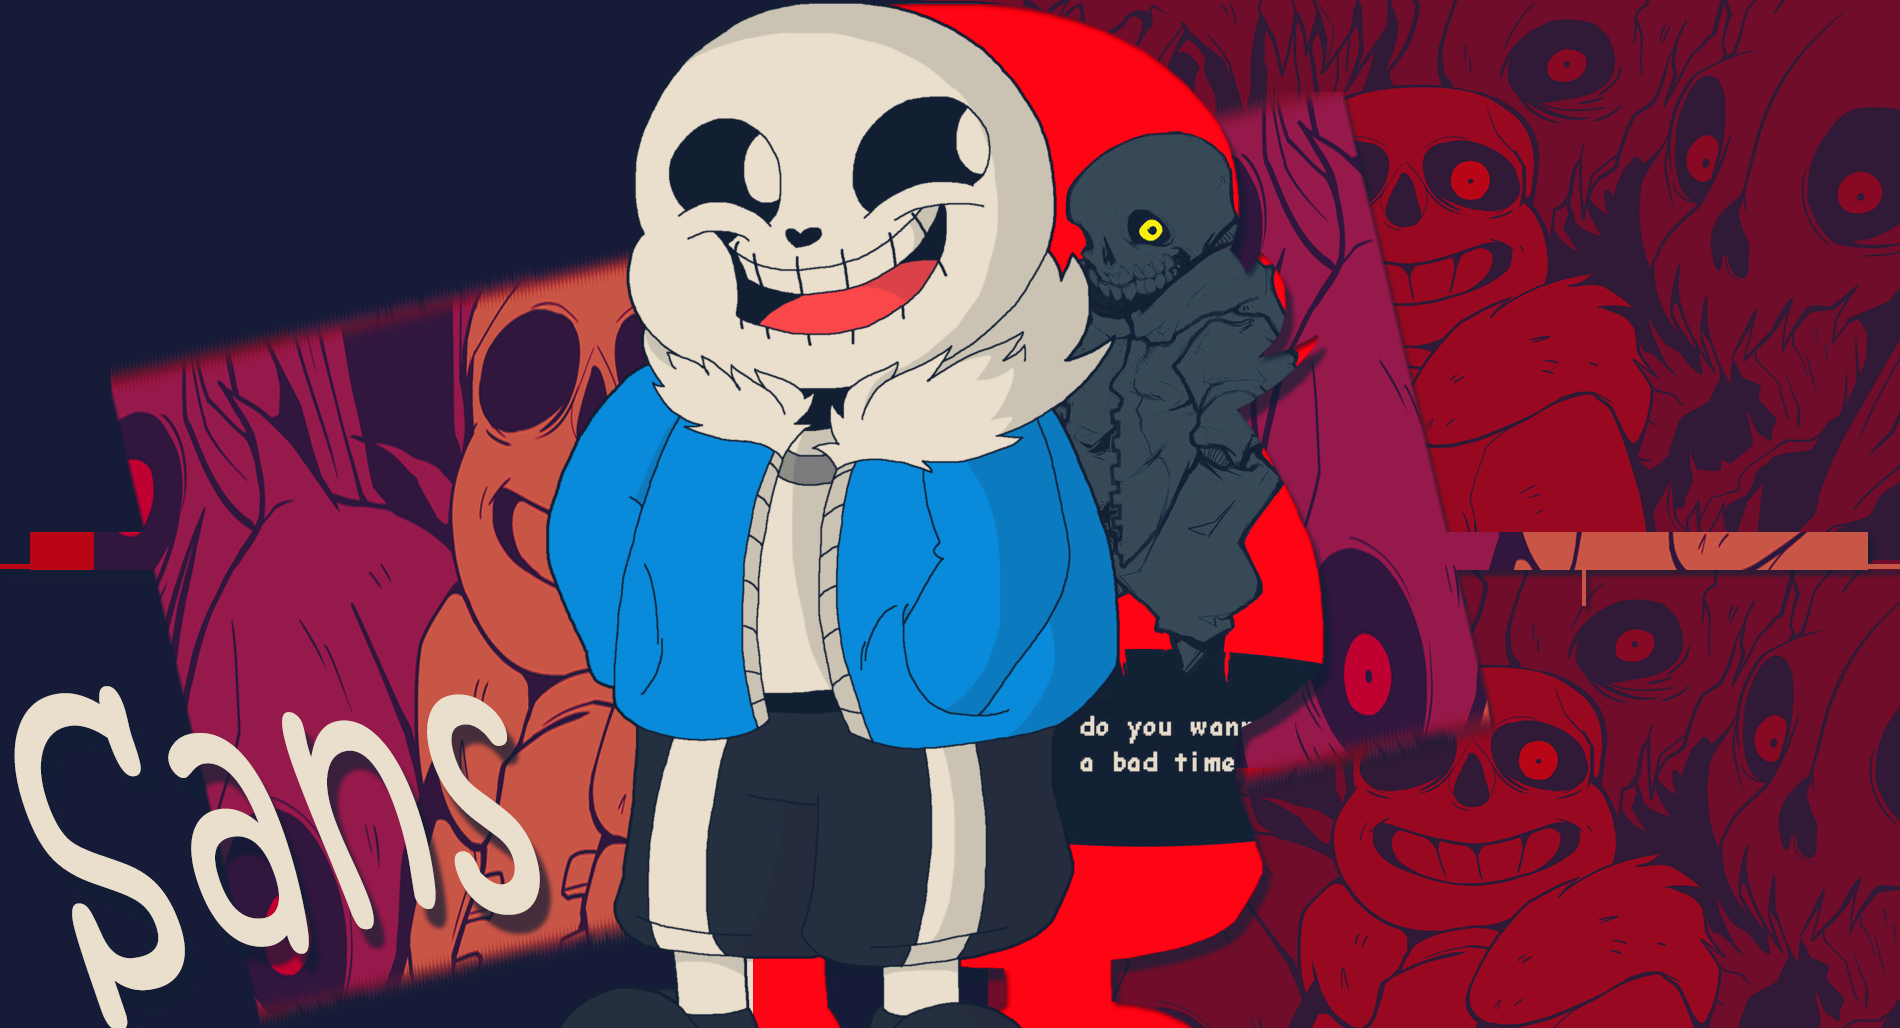 269 Undertale HD Wallpapers Background Images Wallpaper Abyss